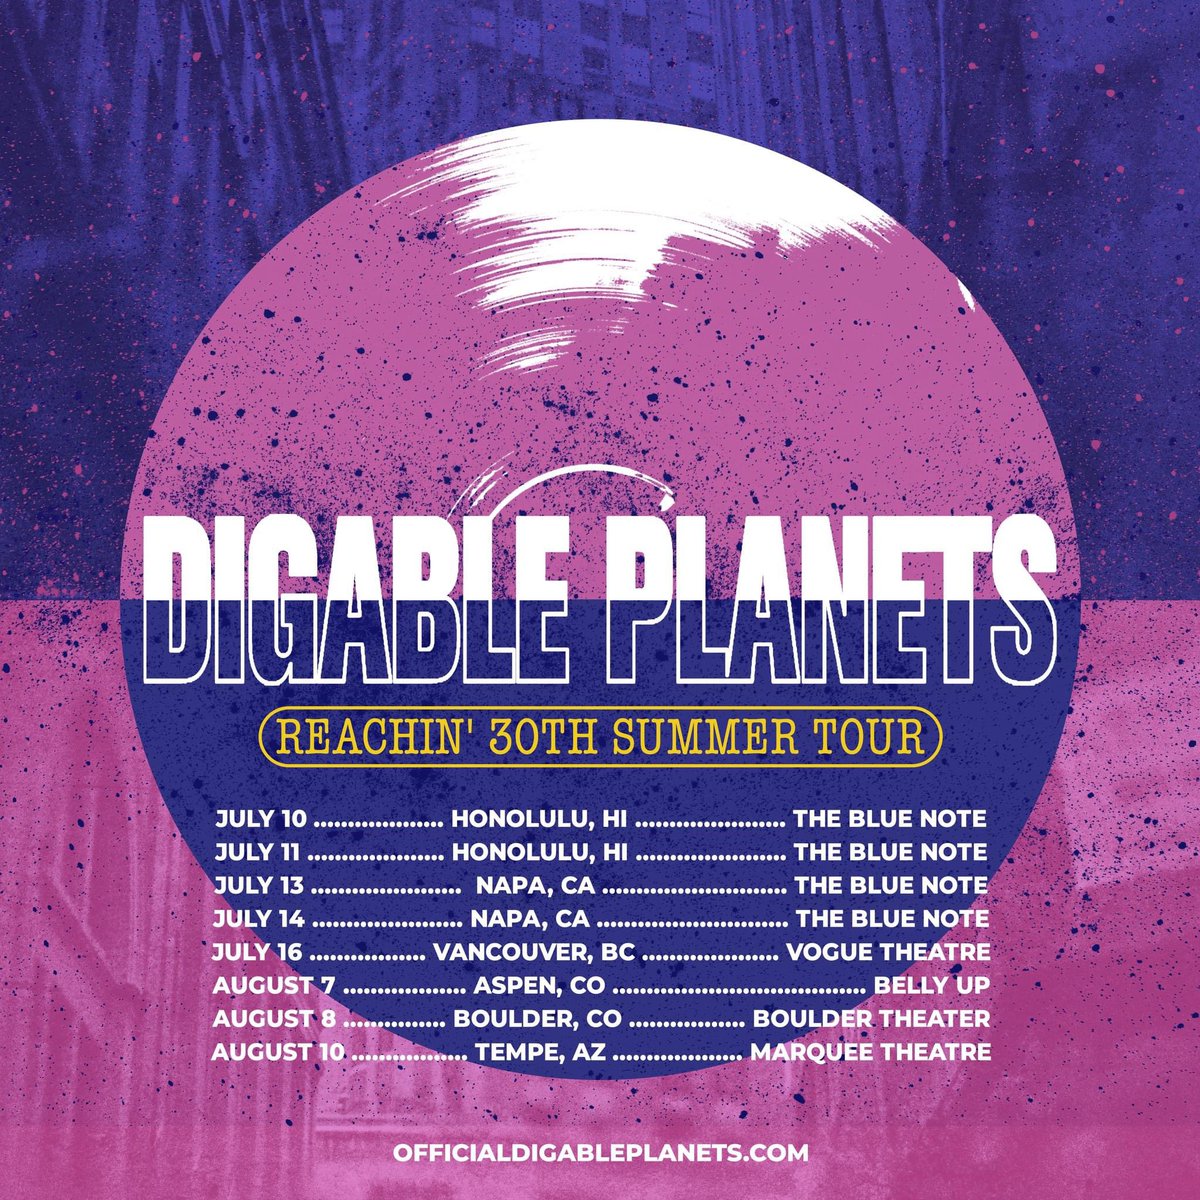 NEW SHOWS!!! We’re bringing our #REACHIN30 tour back this Summer! Tickets are on sale Friday 🪐🪐🪐 For presales & more info visit officialdigableplanets.com/shows